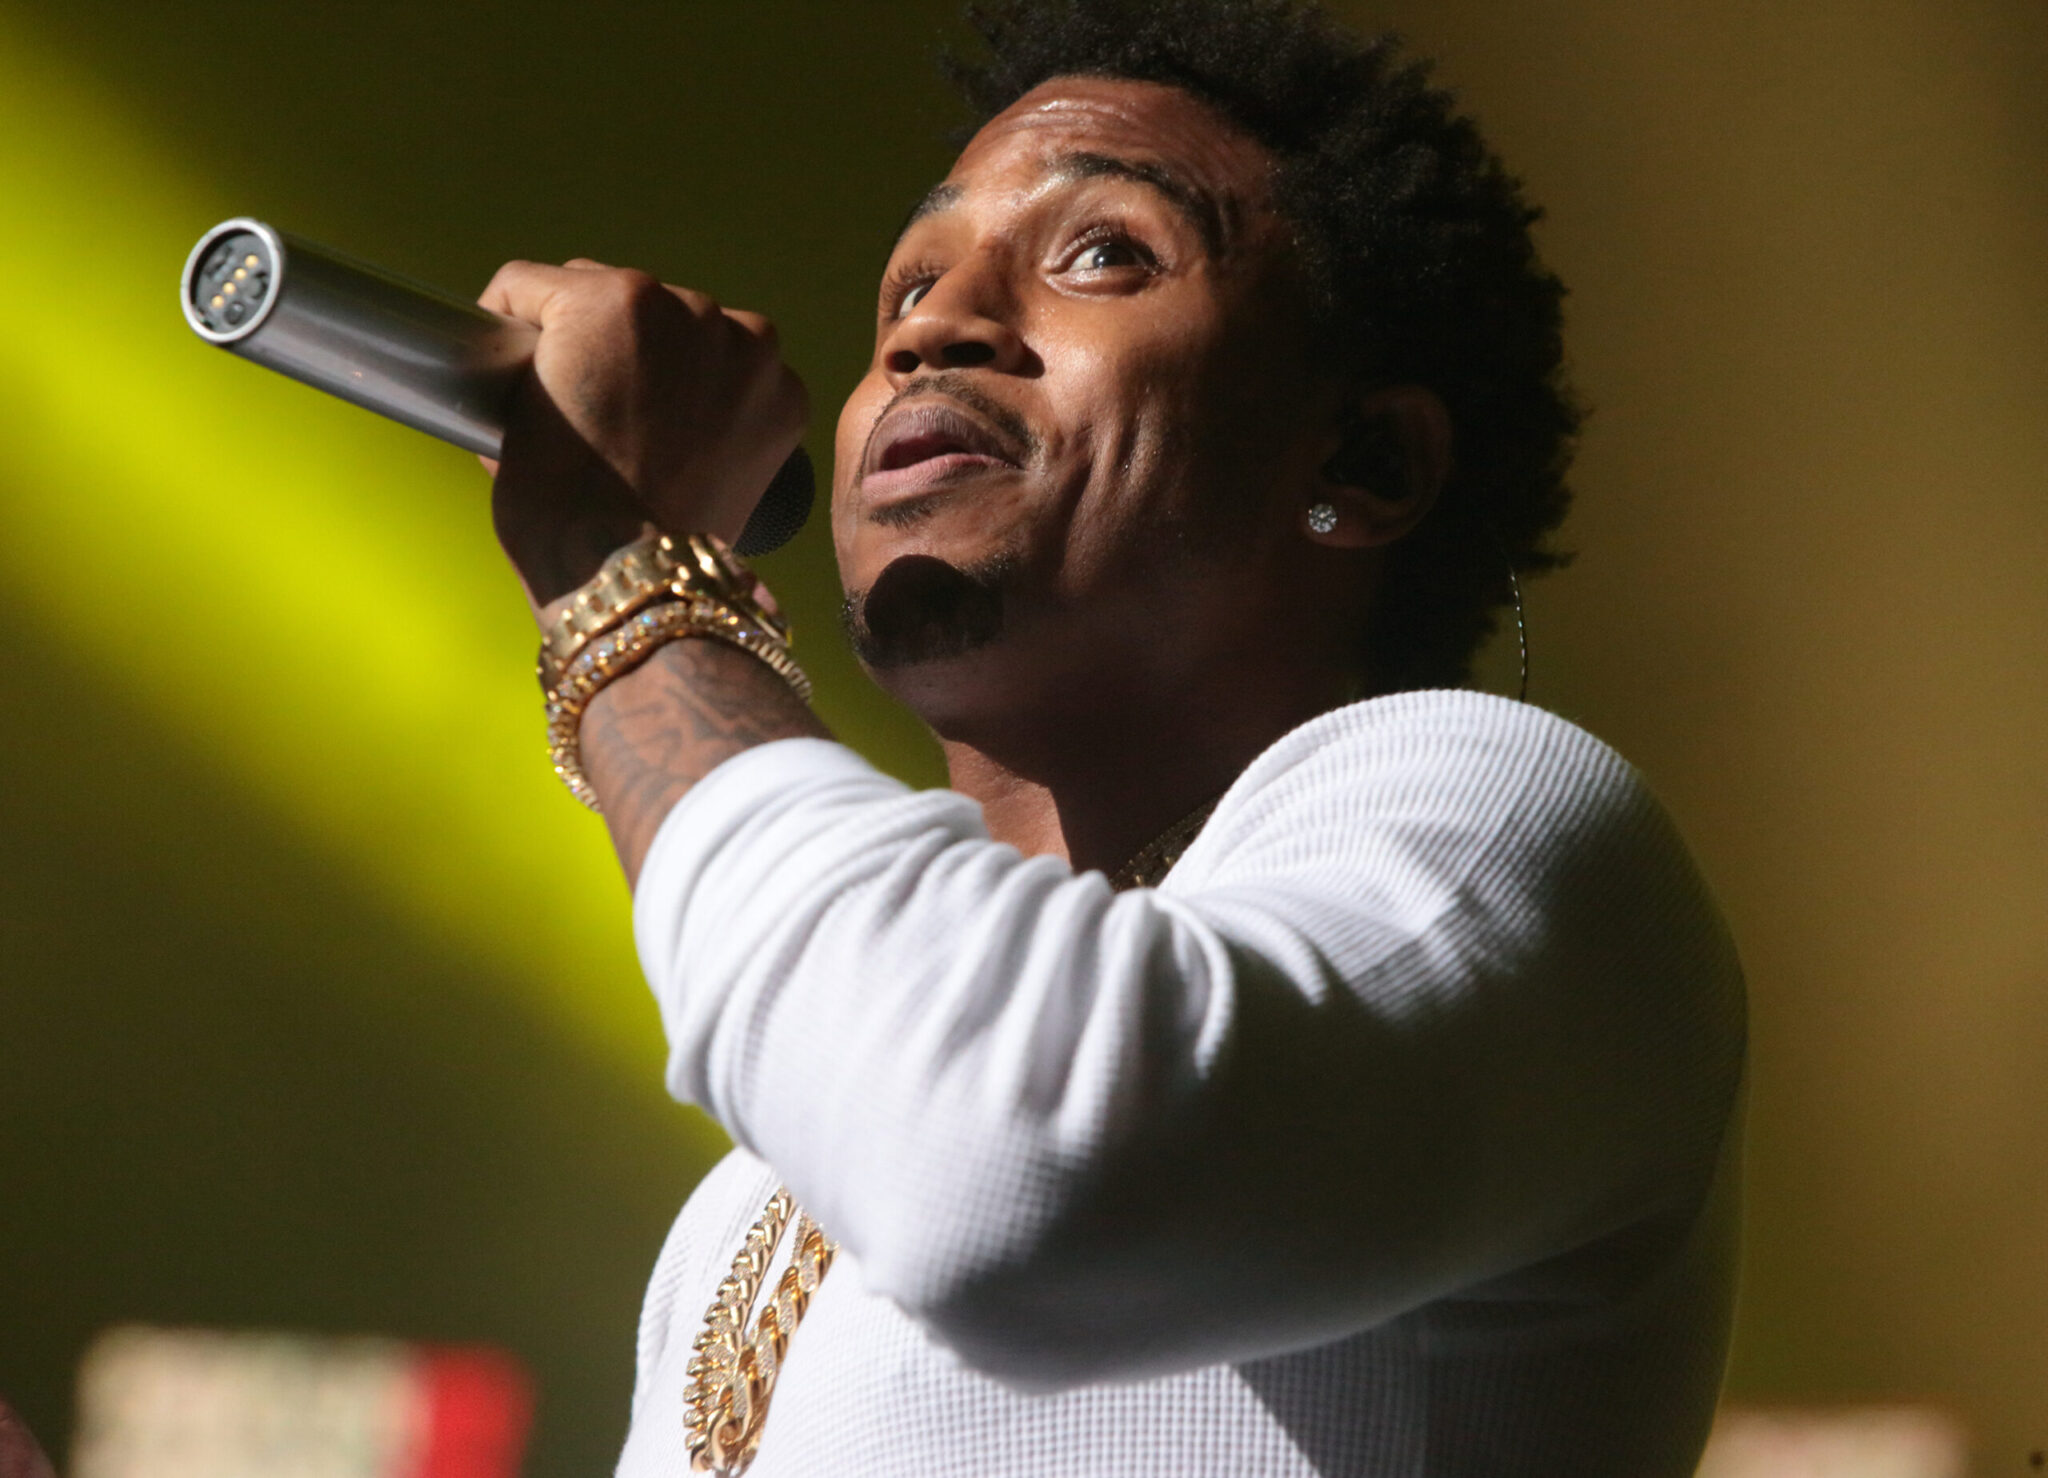 New Lawsuit Filed against Trey Songz